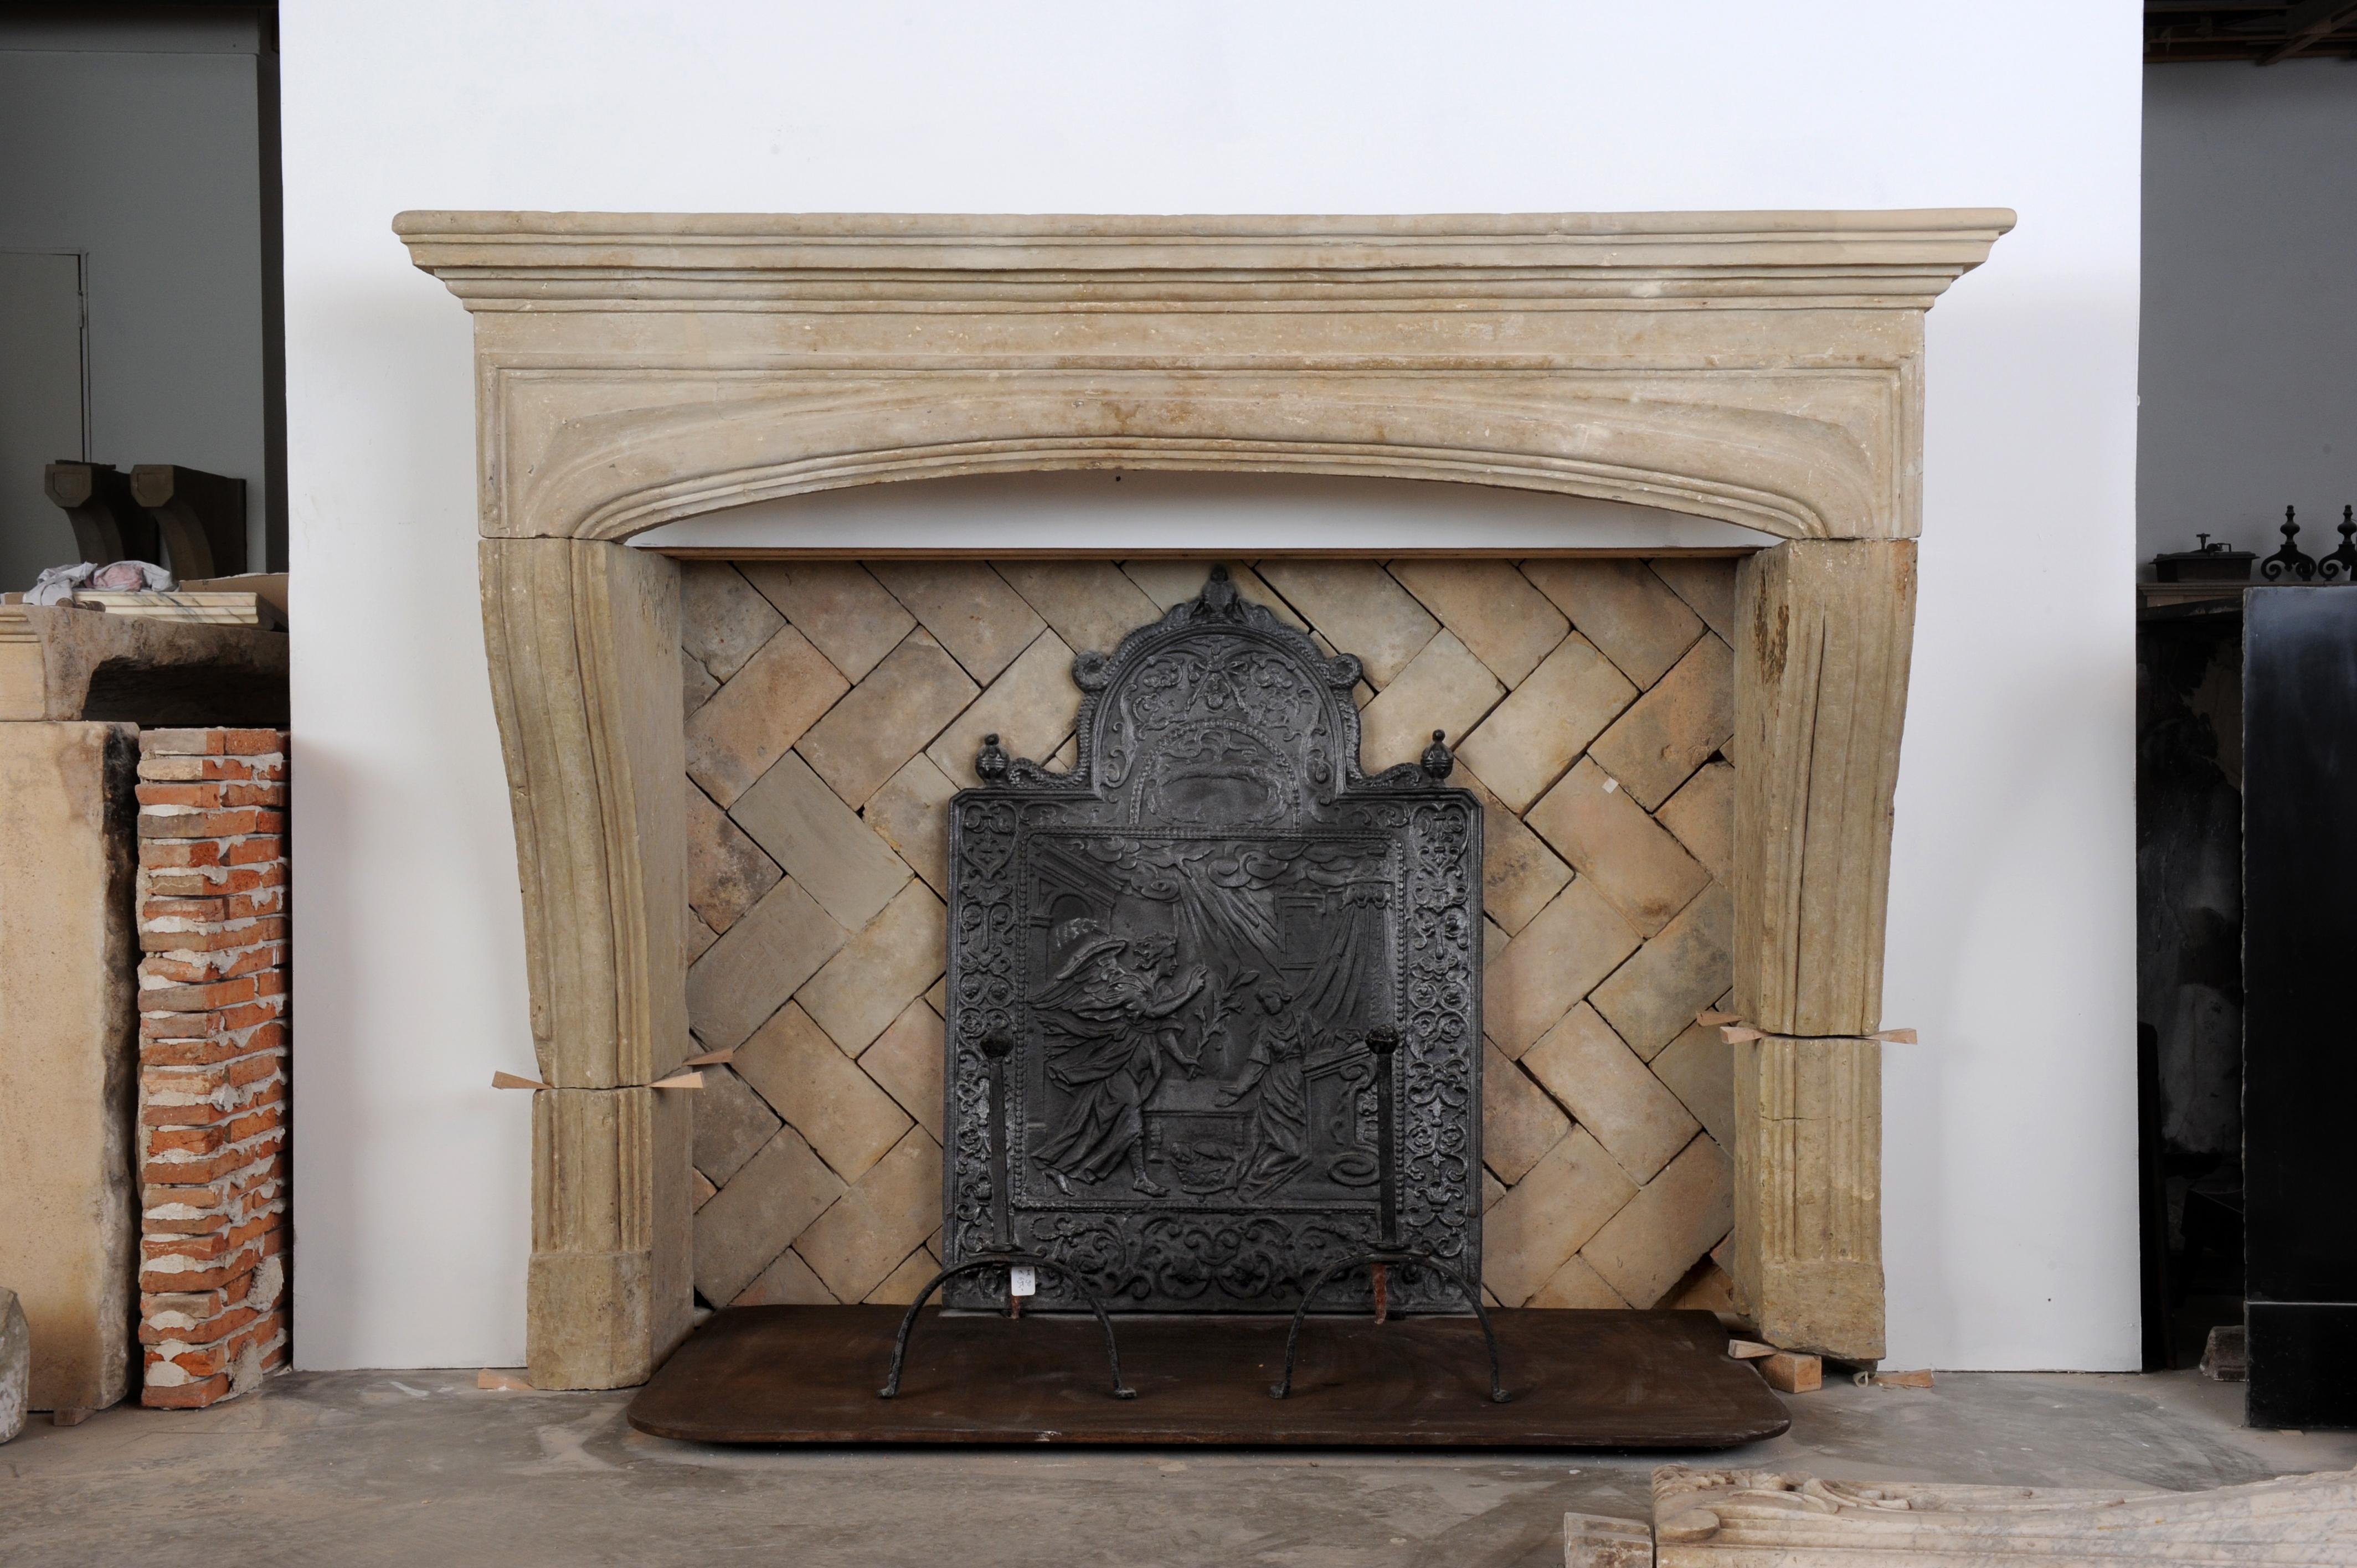 Amazing rustic French Louis XIV fireplace mantel from the 18th Century.

This strong profiled mantel comes from the center of the Bordeaux area.
Originally installed in the grand room of a nice French manor house.
We cleaned, restored and build